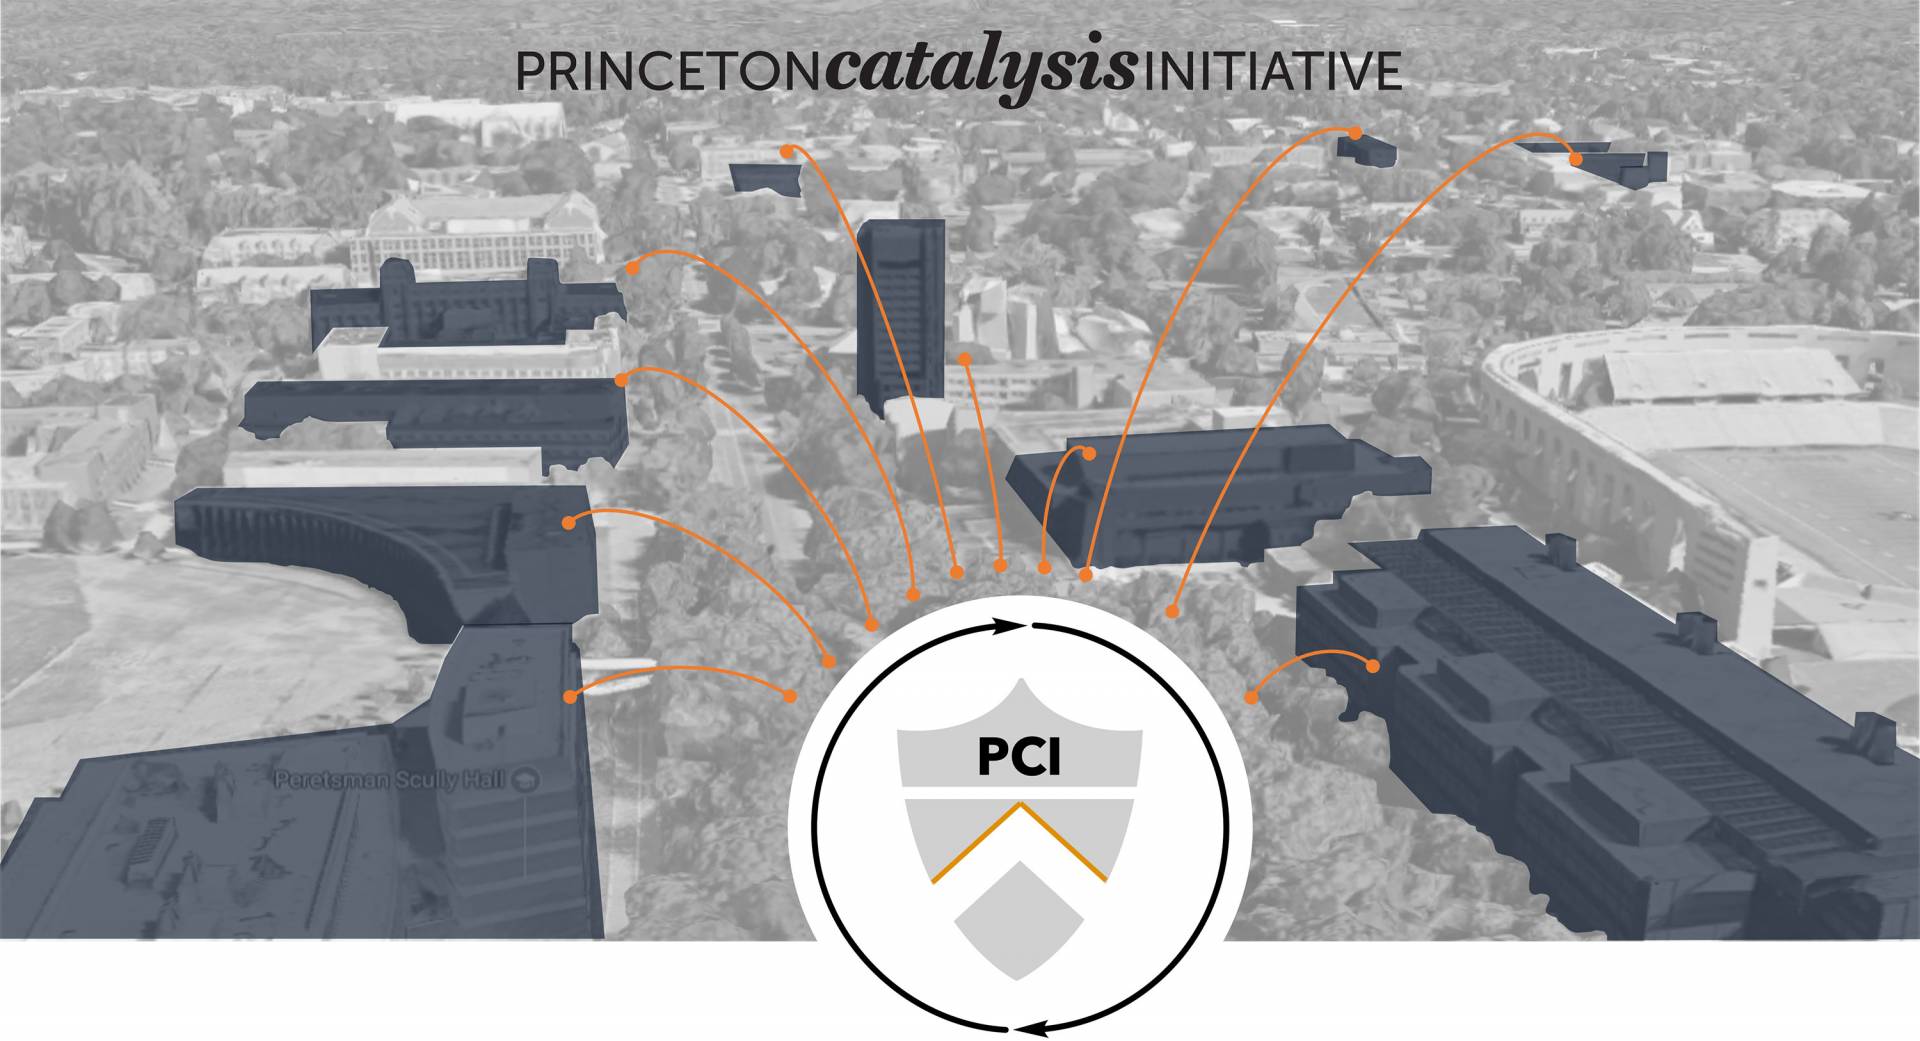 map of science buildings on Princeton University campus